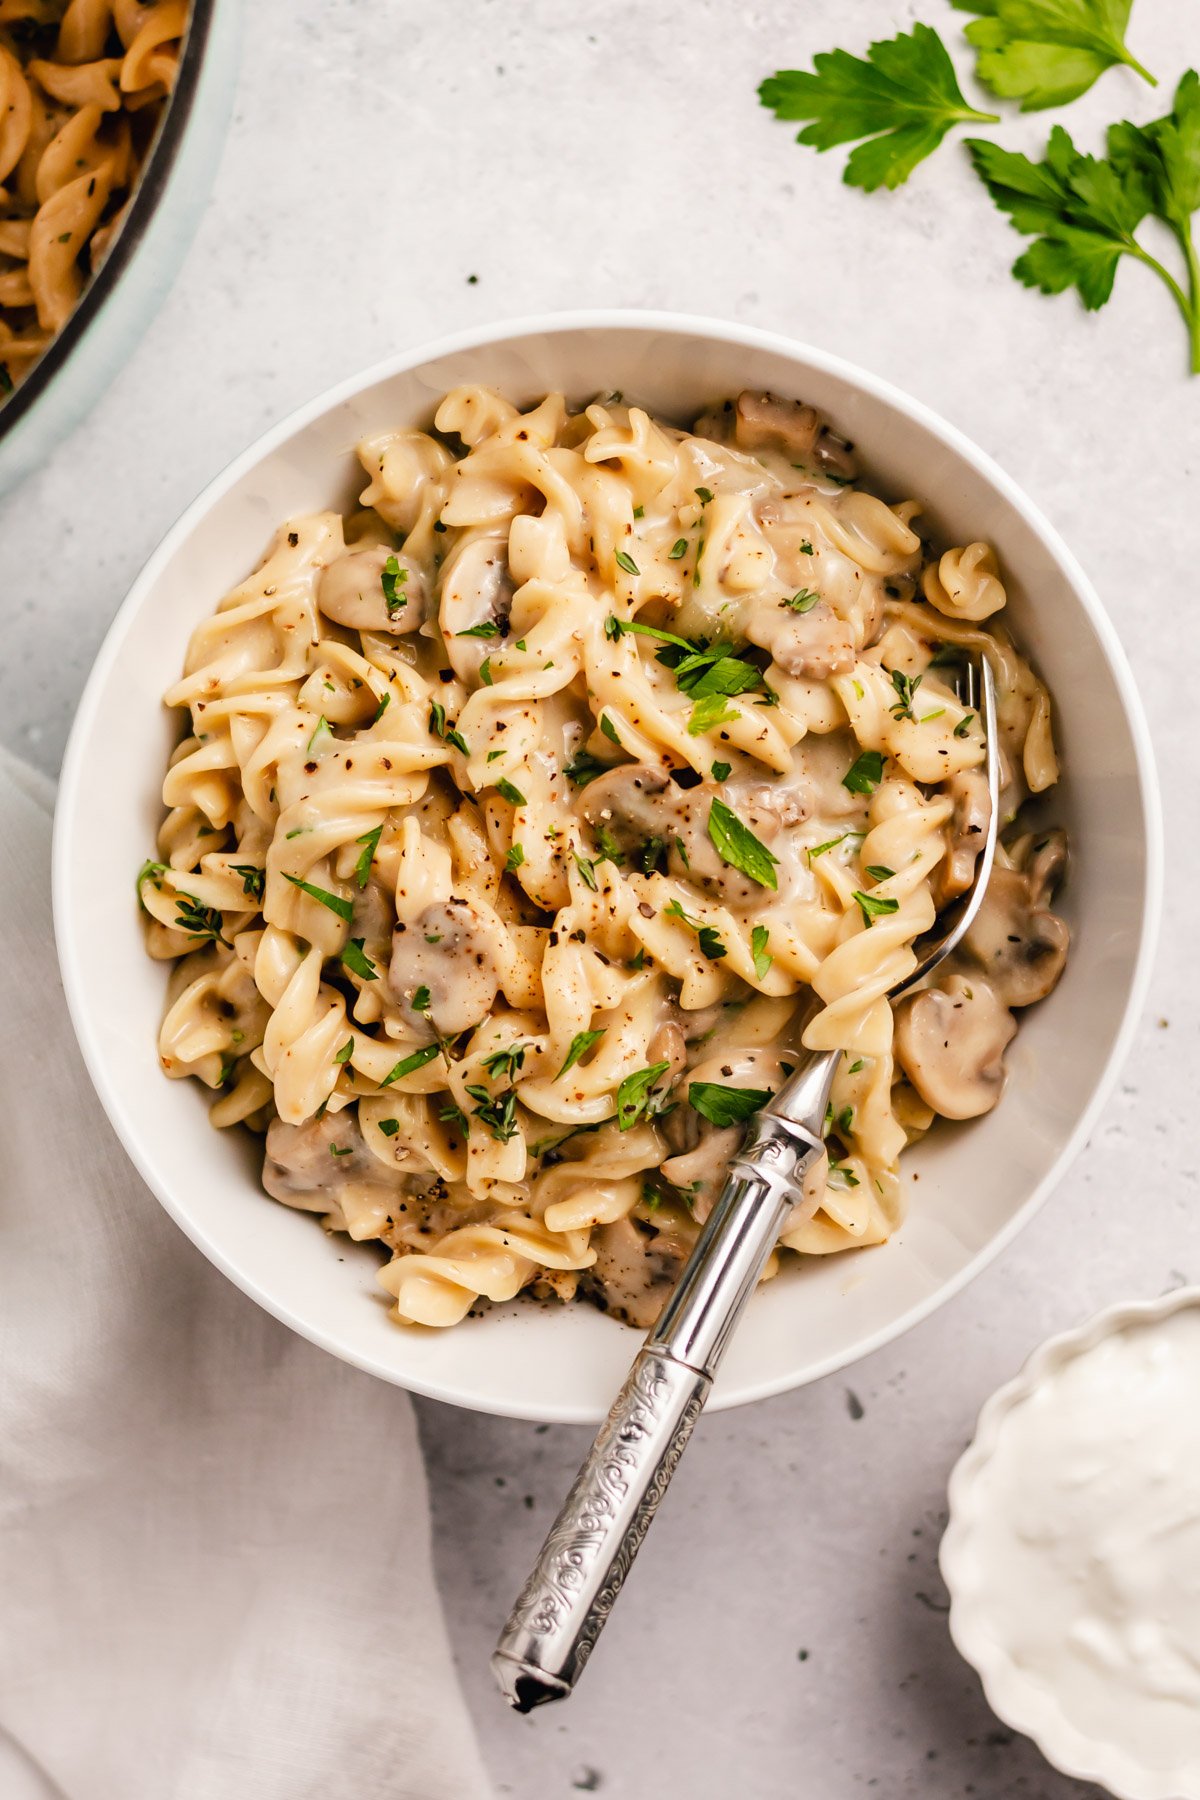 This one pot mushroom stroganoff is a super easy meatless meal that is made in 30 minutes. It's full of fresh flavor and is dairy free and can easily be made gluten free or vegetarian. The mushroom stroganoff is perfect for a cozy night in or for meal prep for satisfying weekday lunches. Save some time and cut down on dishes and give this recipe a try! #30minutemeals #onepotpasta #glutenfree #dairyfree #meatless